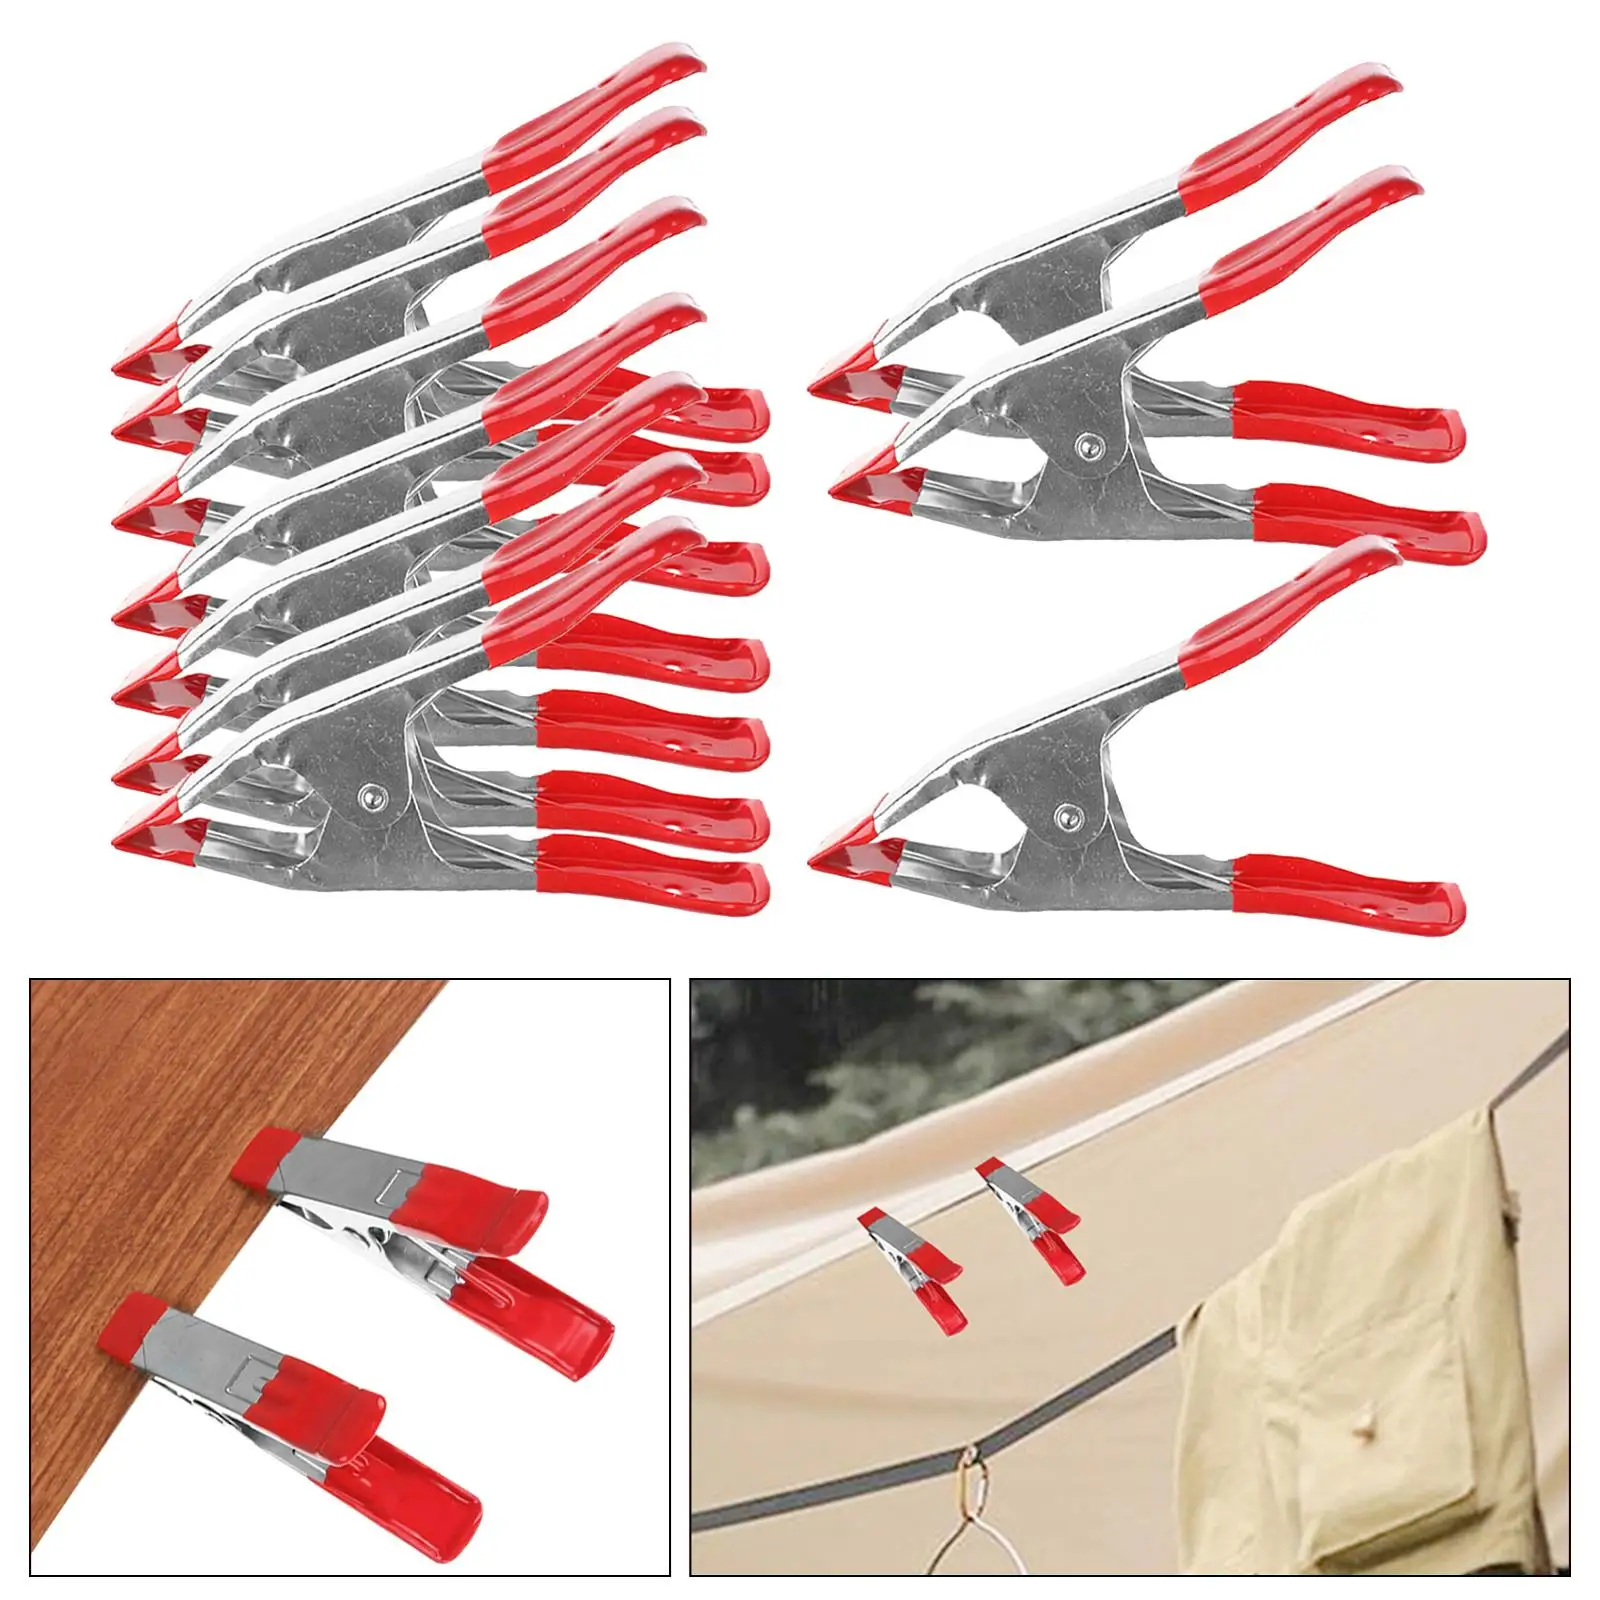 10 Pieces Spring Clamps Crocodile Clips DIY Tools Alligator Clips Clamps for Photo Studio